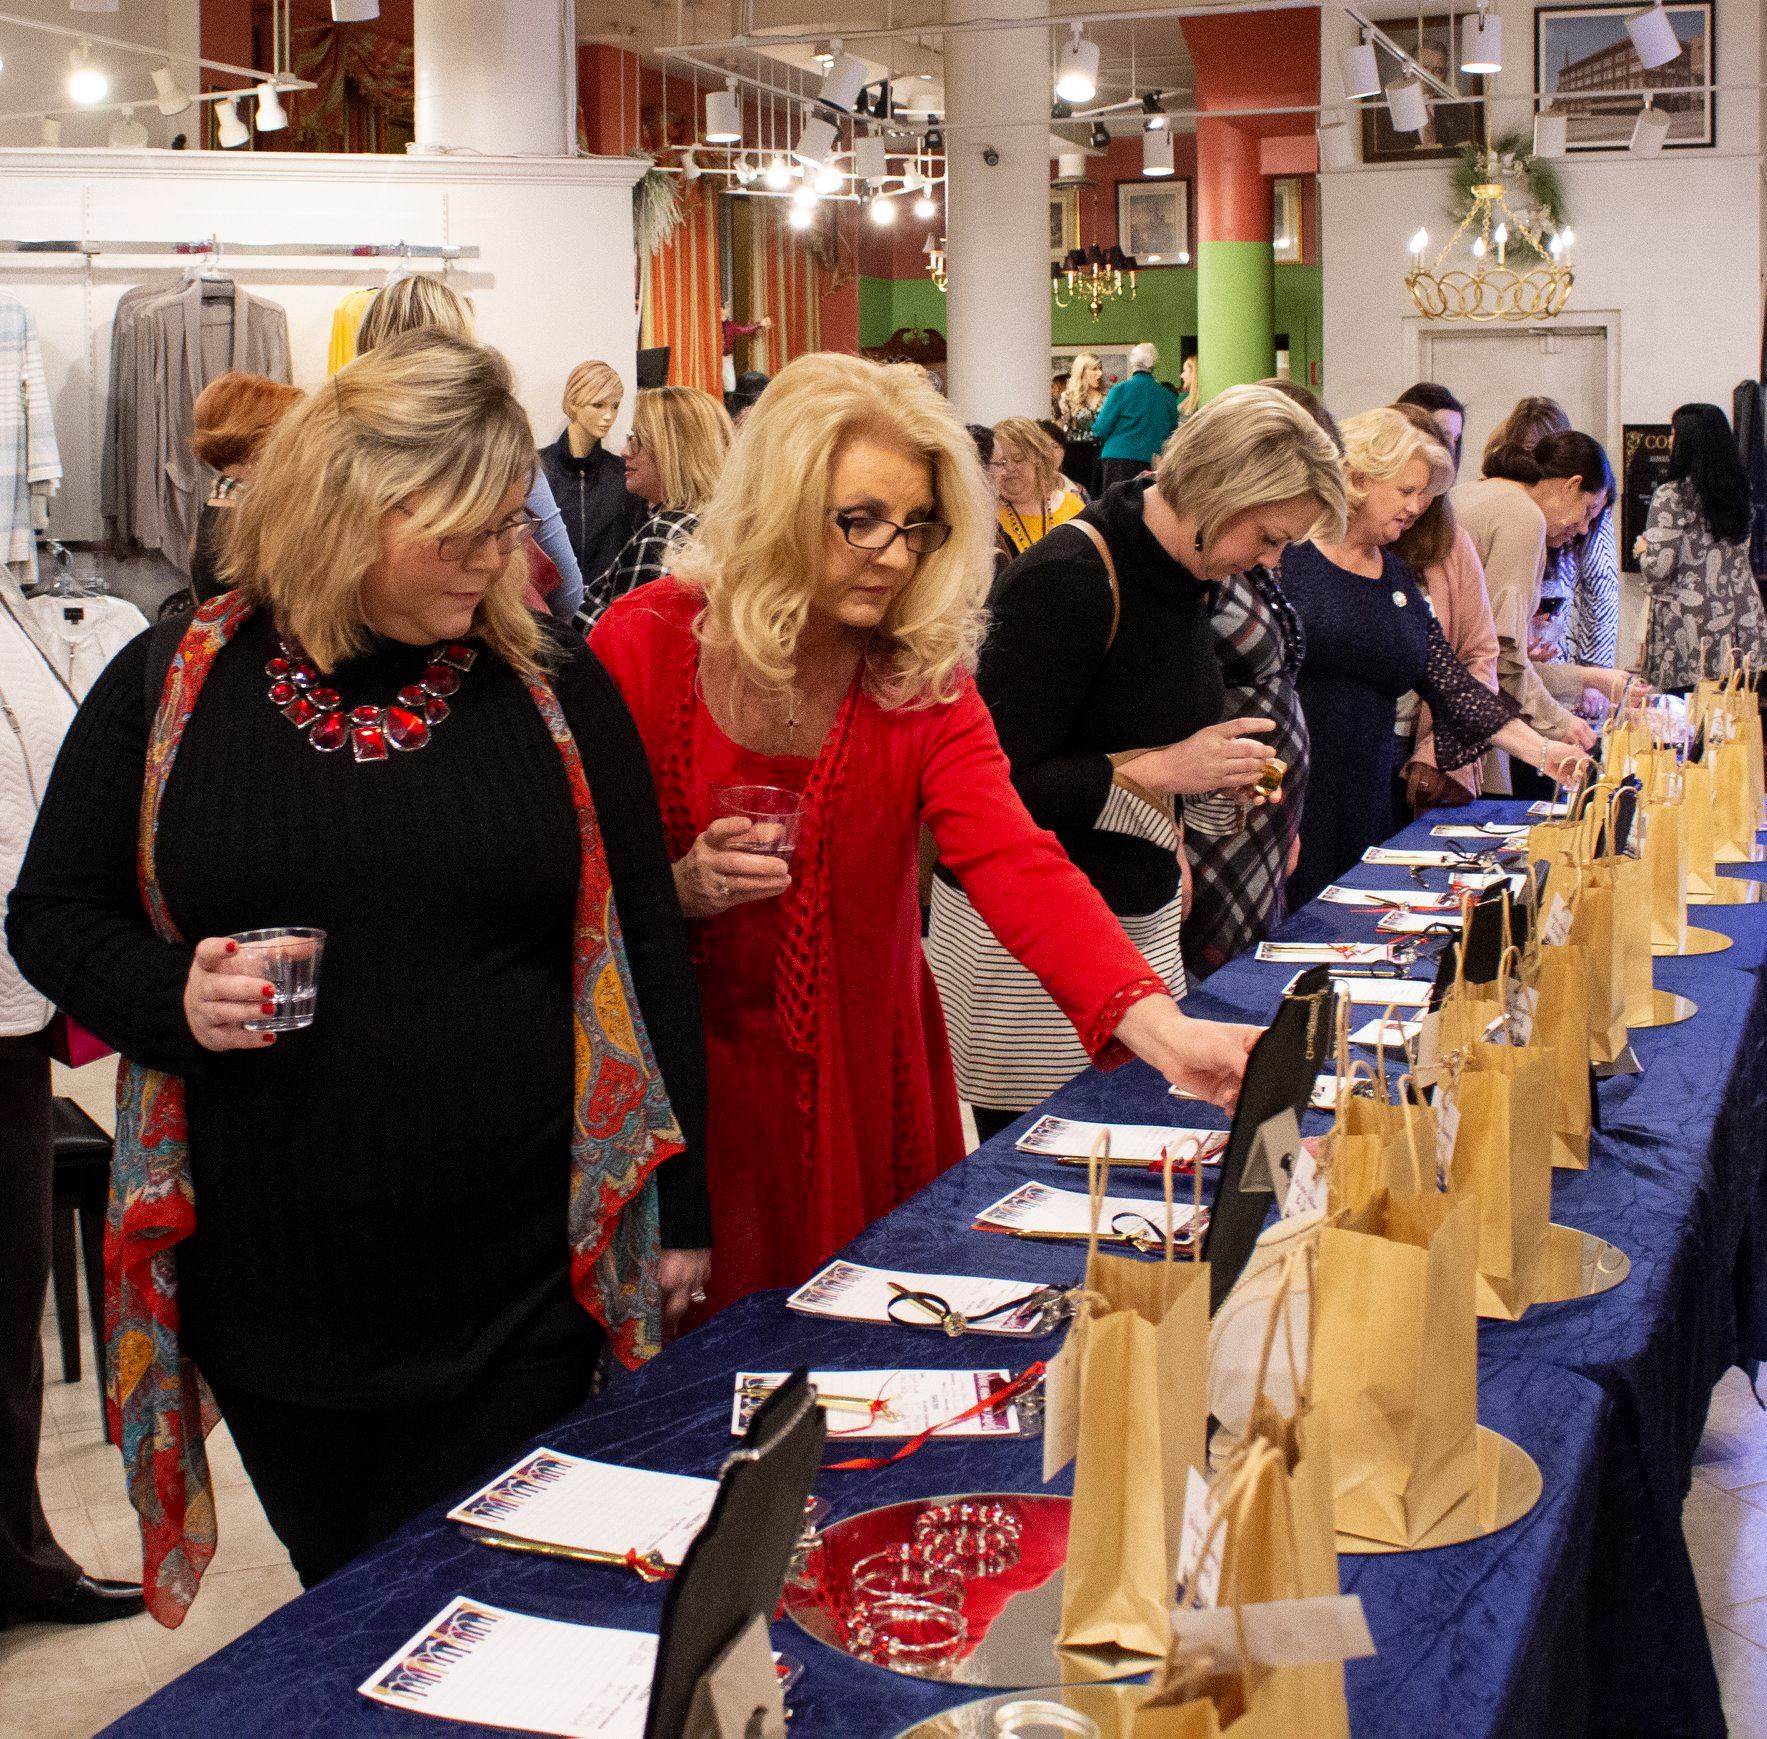 Women look at jewlery items for auction